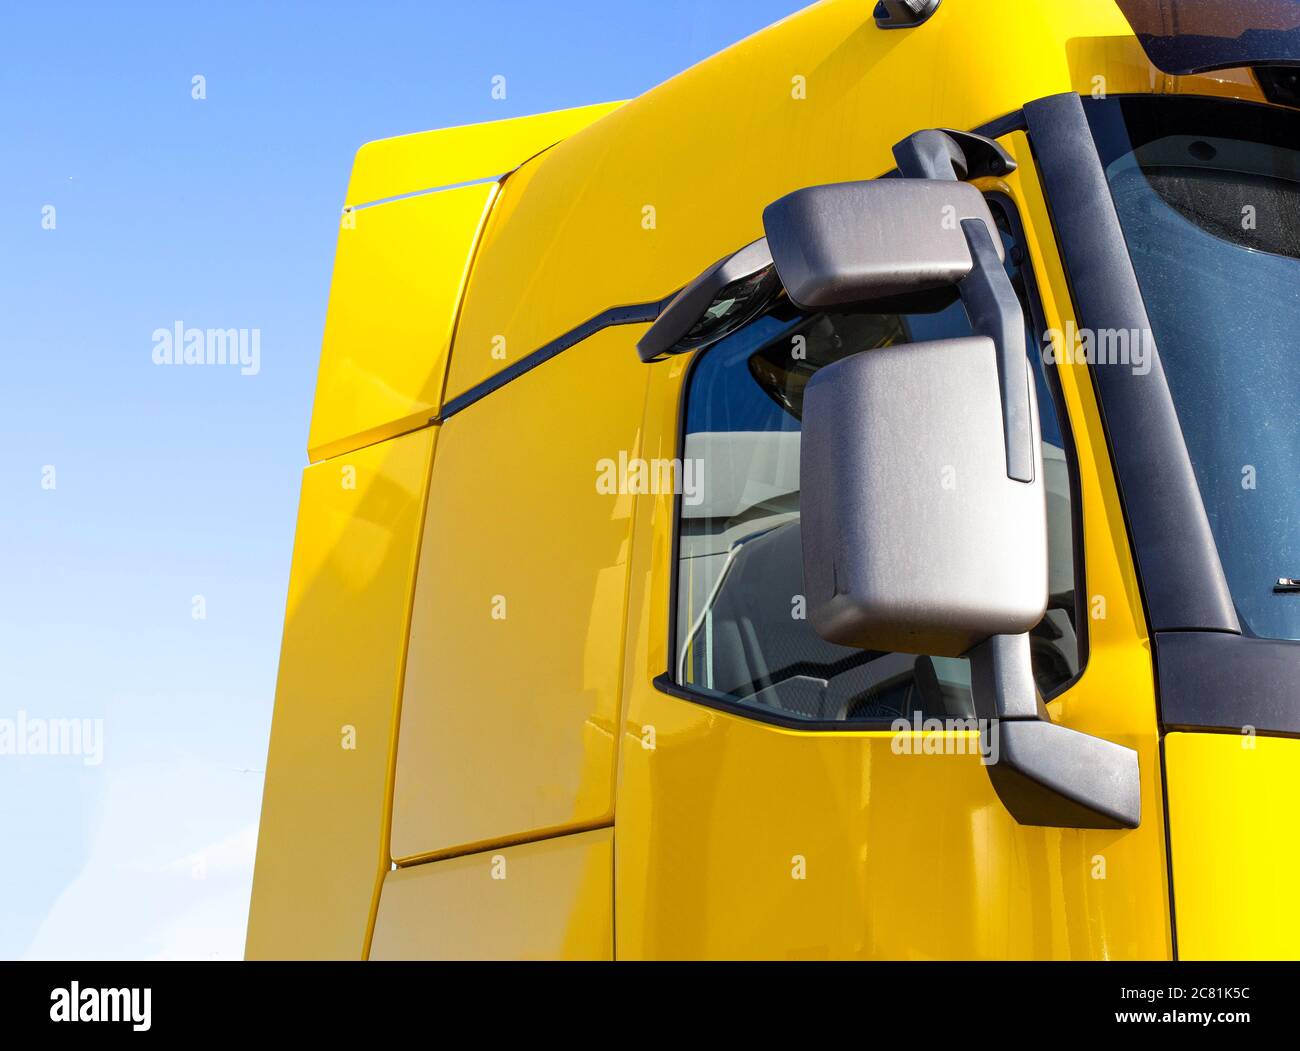 modern, streamlined truck cab with good aerodynamics with a rearview mirror. Yellow truck cab, technology Stock Photo